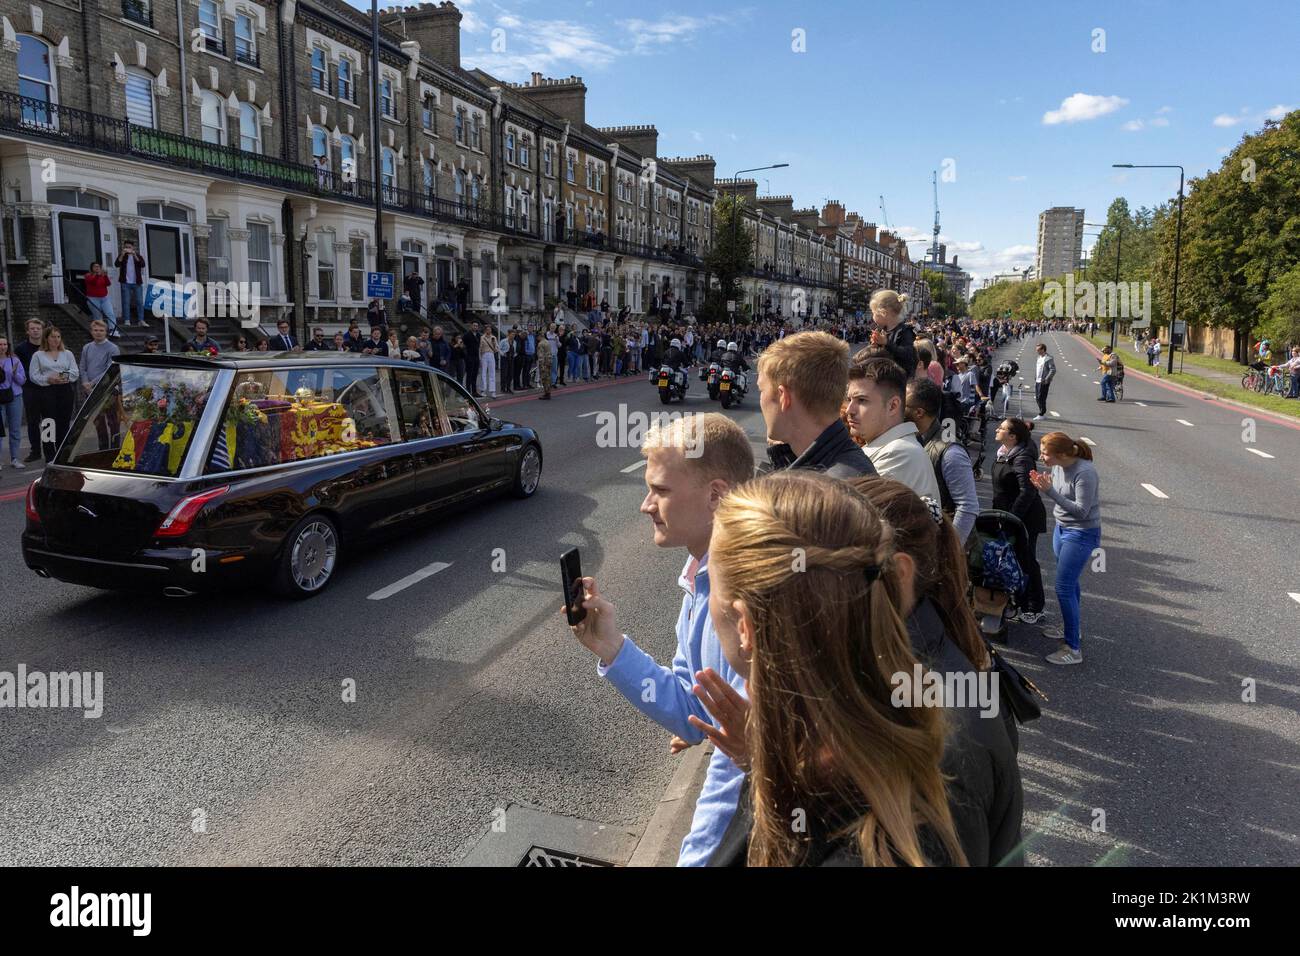 People watch as Britain's Queen Elizabeth's coffin is transported, on the day of her state funeral and burial, in London, Britain, September 19, 2022. REUTERS/Carlos Barria Stock Photo